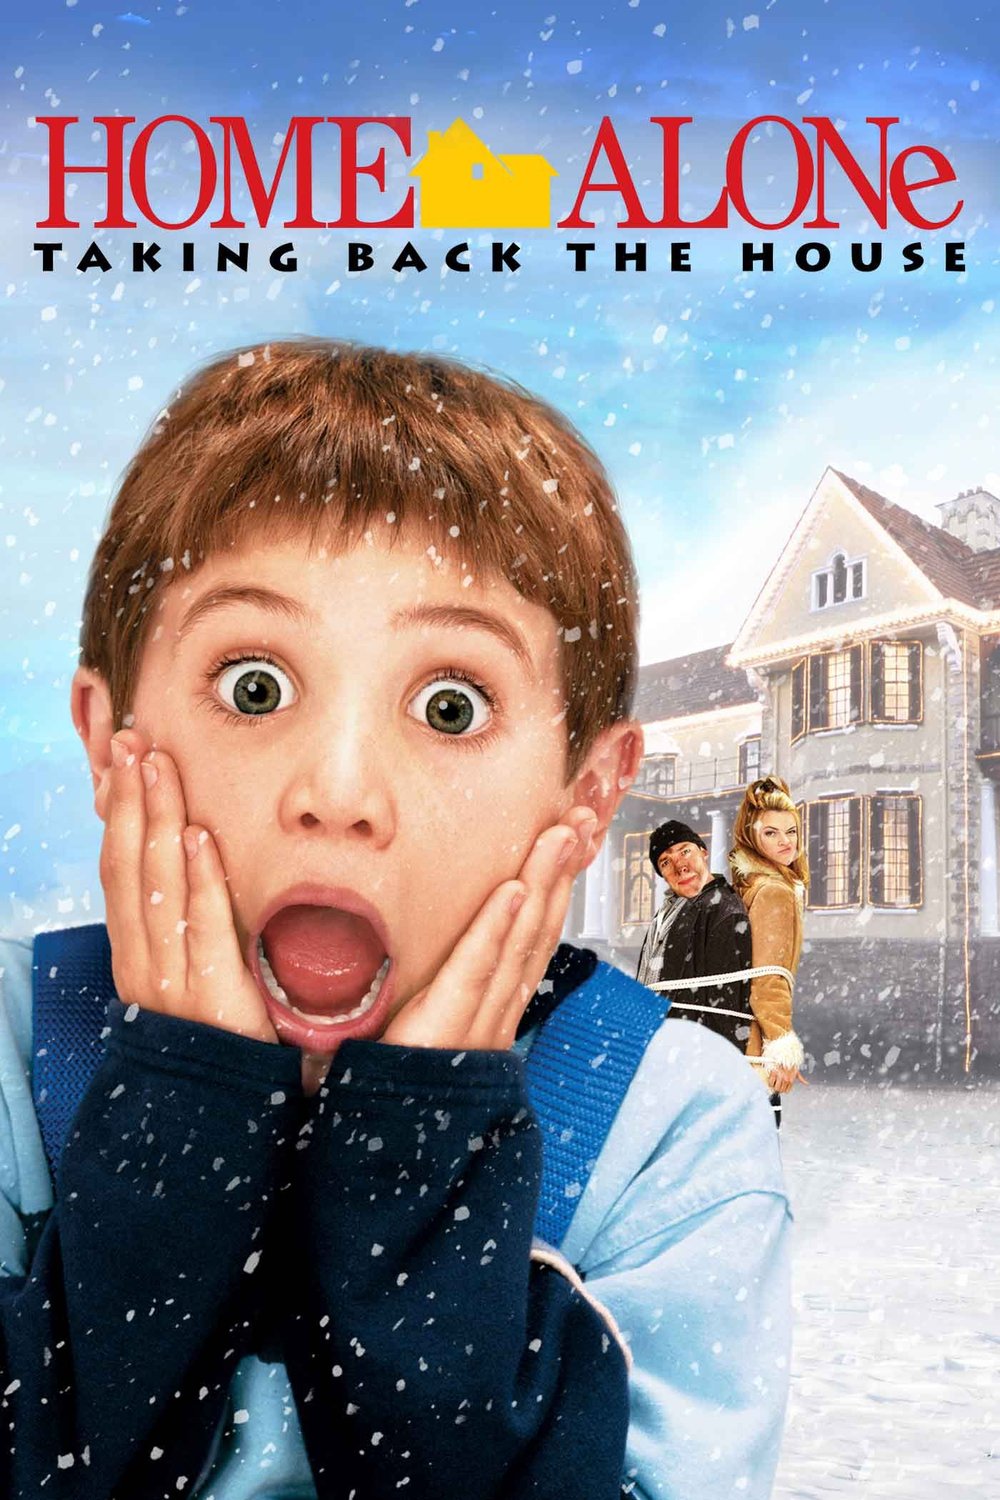 Home Alone 4: Taking Back the House (2002) by Rod Daniel